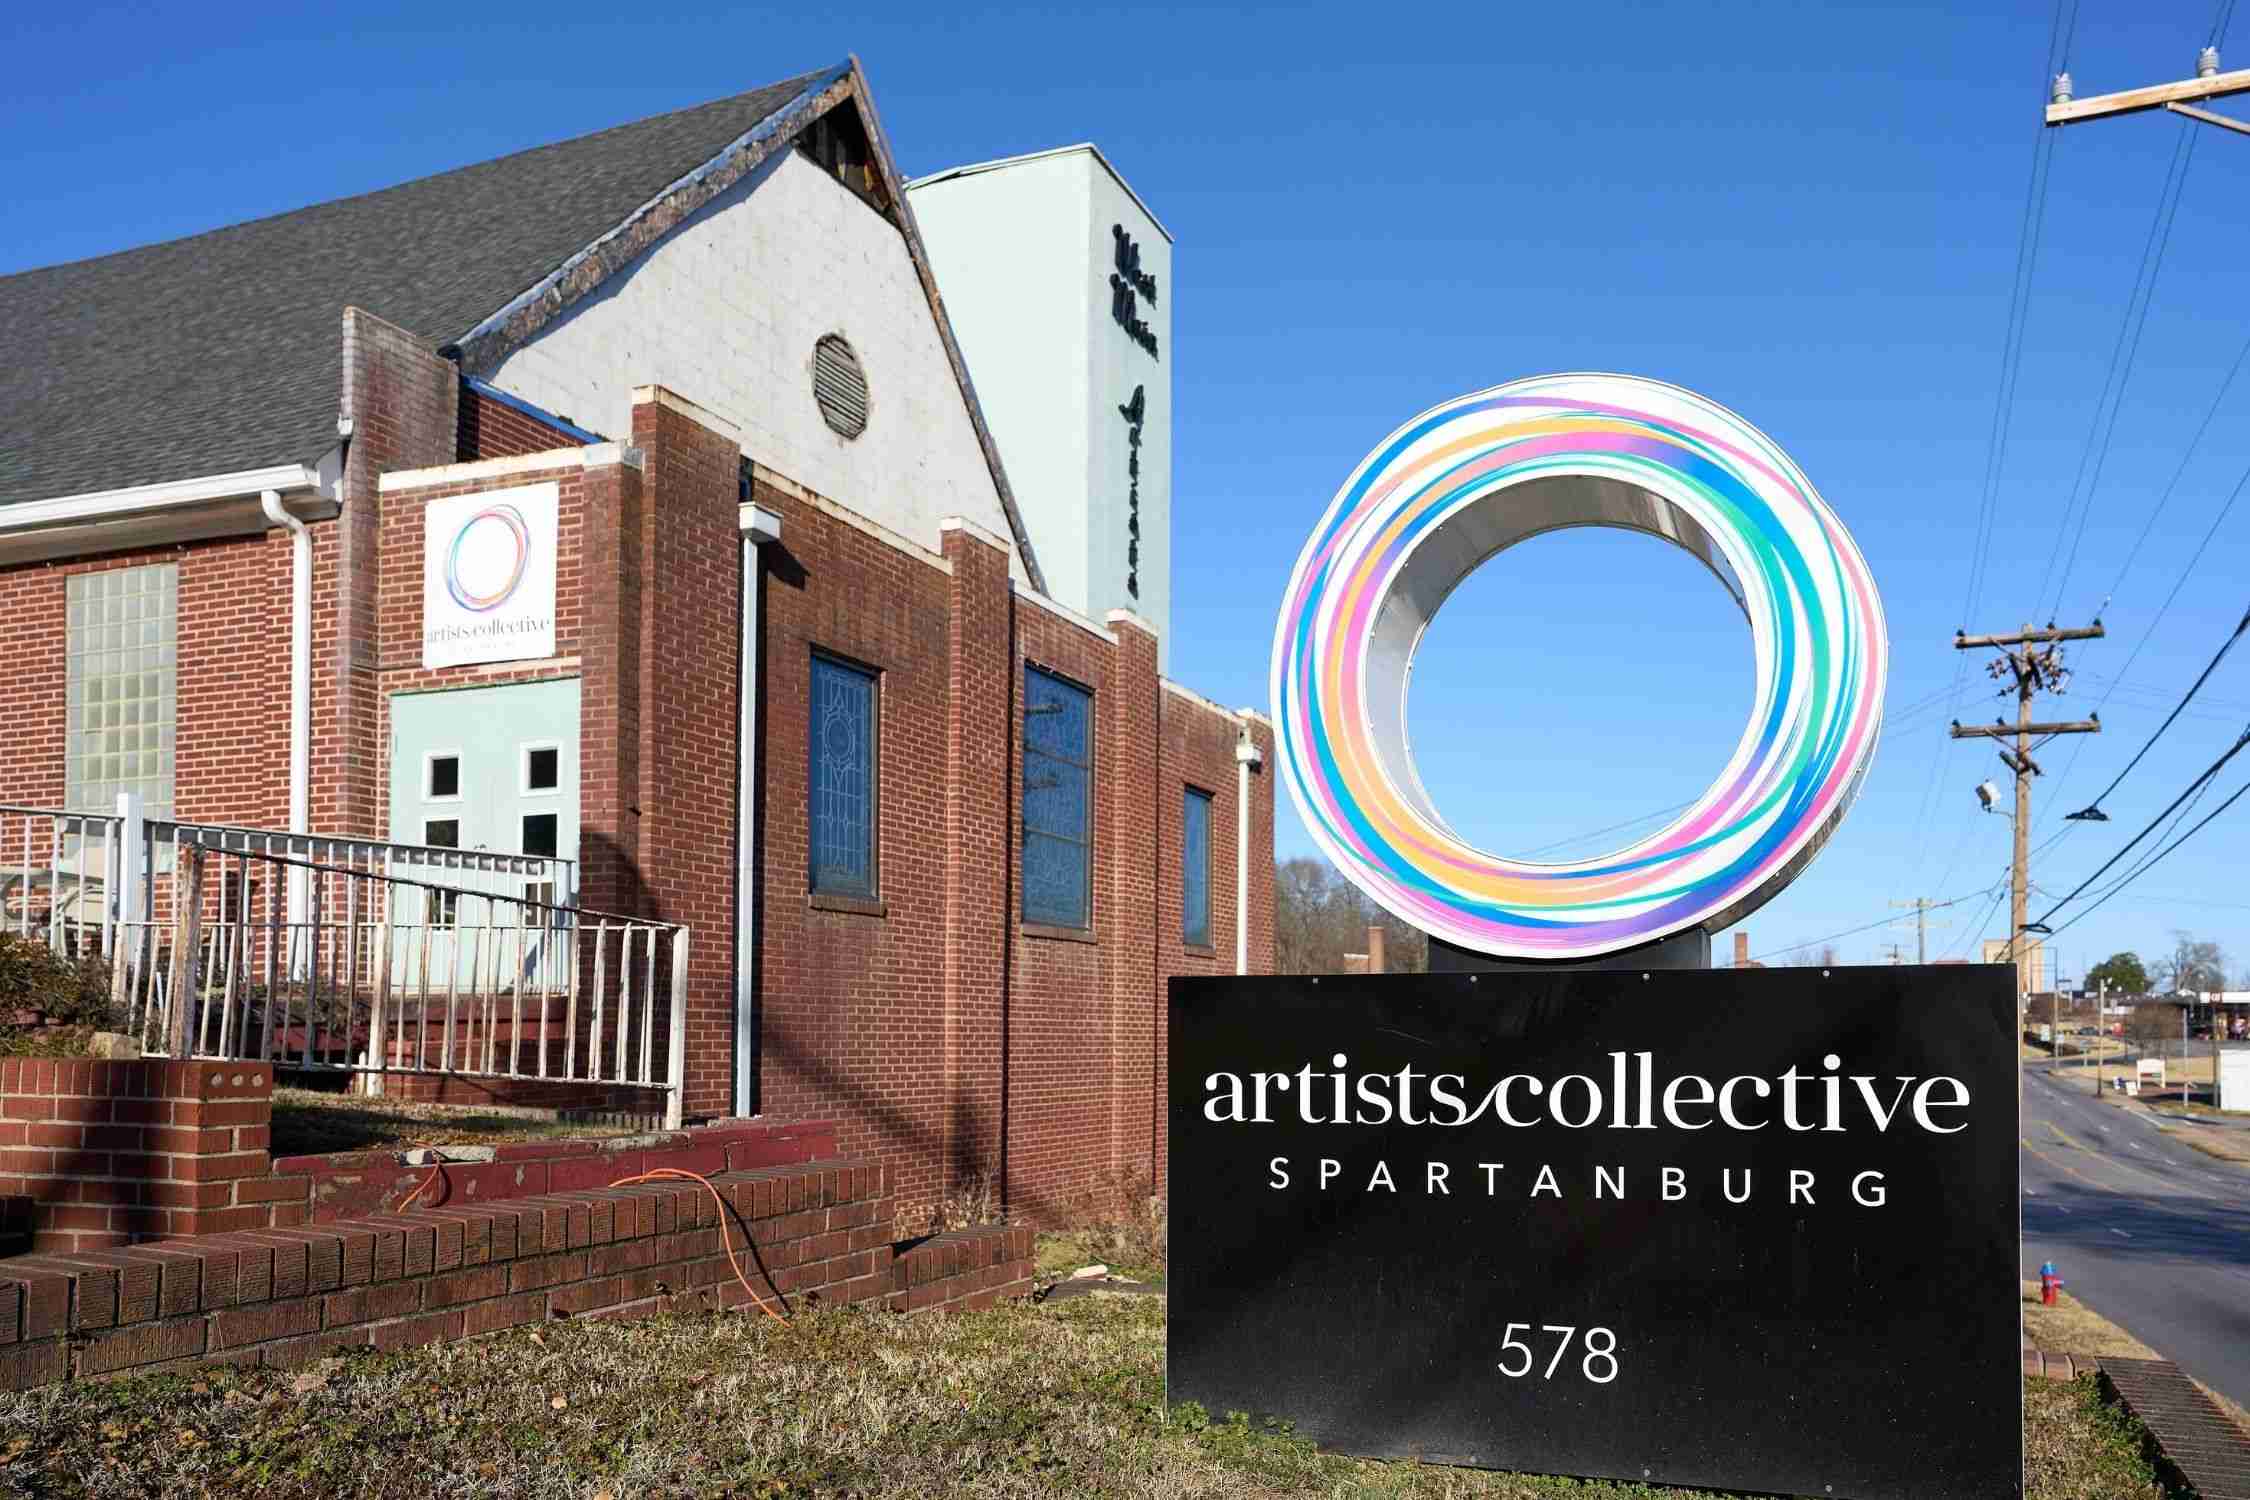 Spartanburg Artist Collective - things to do in spartanburg